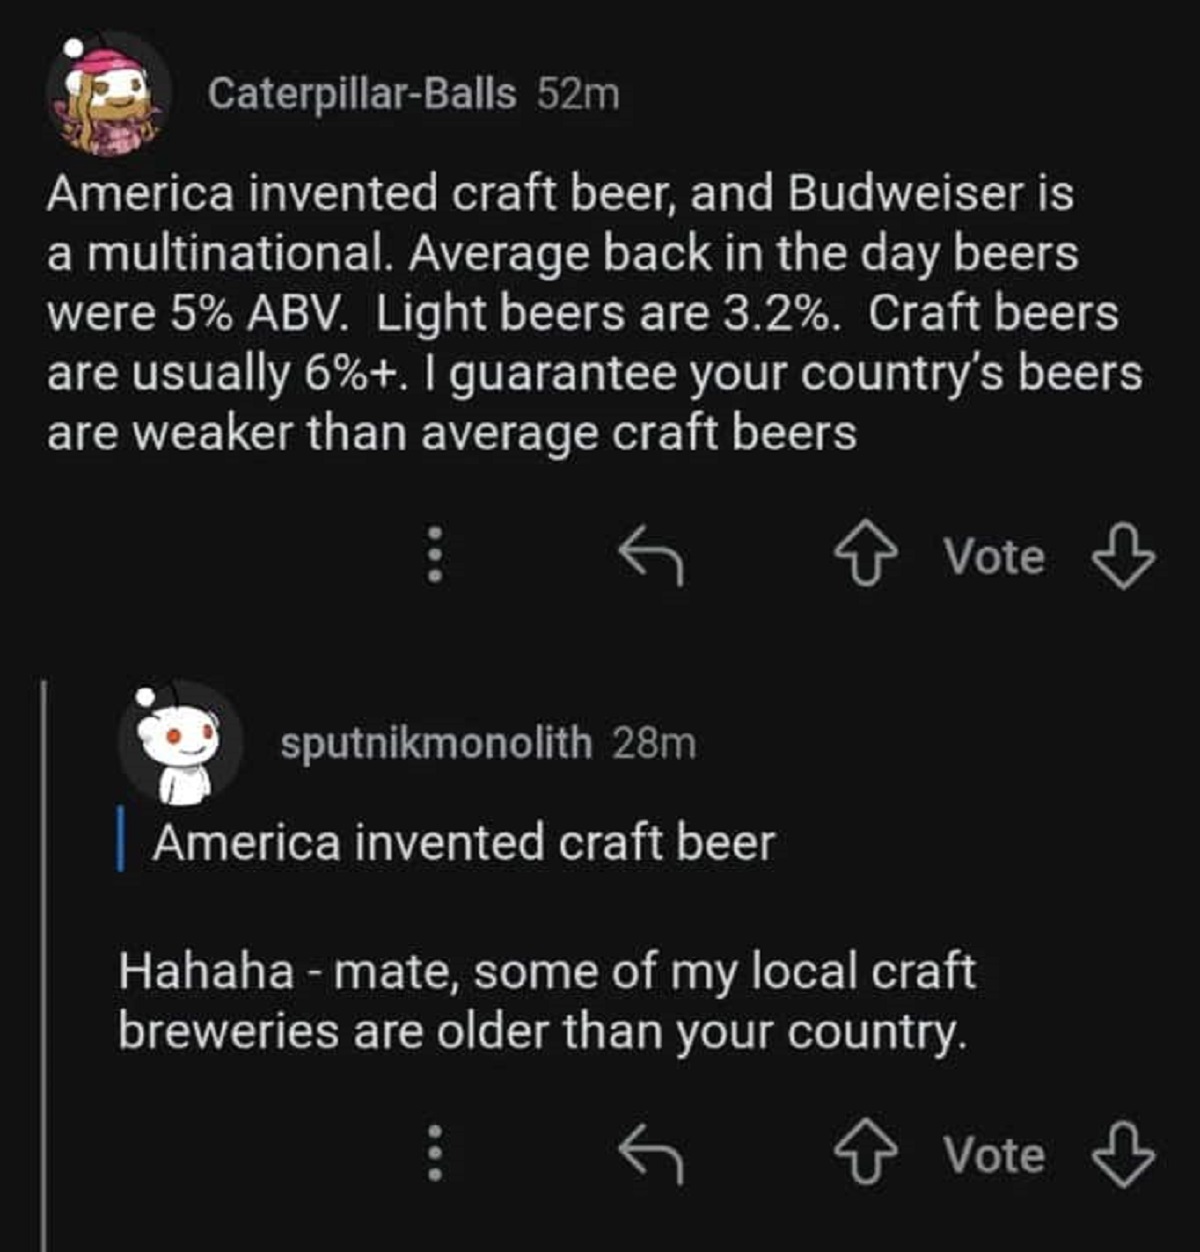 screenshot - CaterpillarBalls 52m America invented craft beer, and Budweiser is a multinational. Average back in the day beers were 5% Abv. Light beers are 3.2%. Craft beers are usually 6%. I guarantee your country's beers are weaker than average craft be